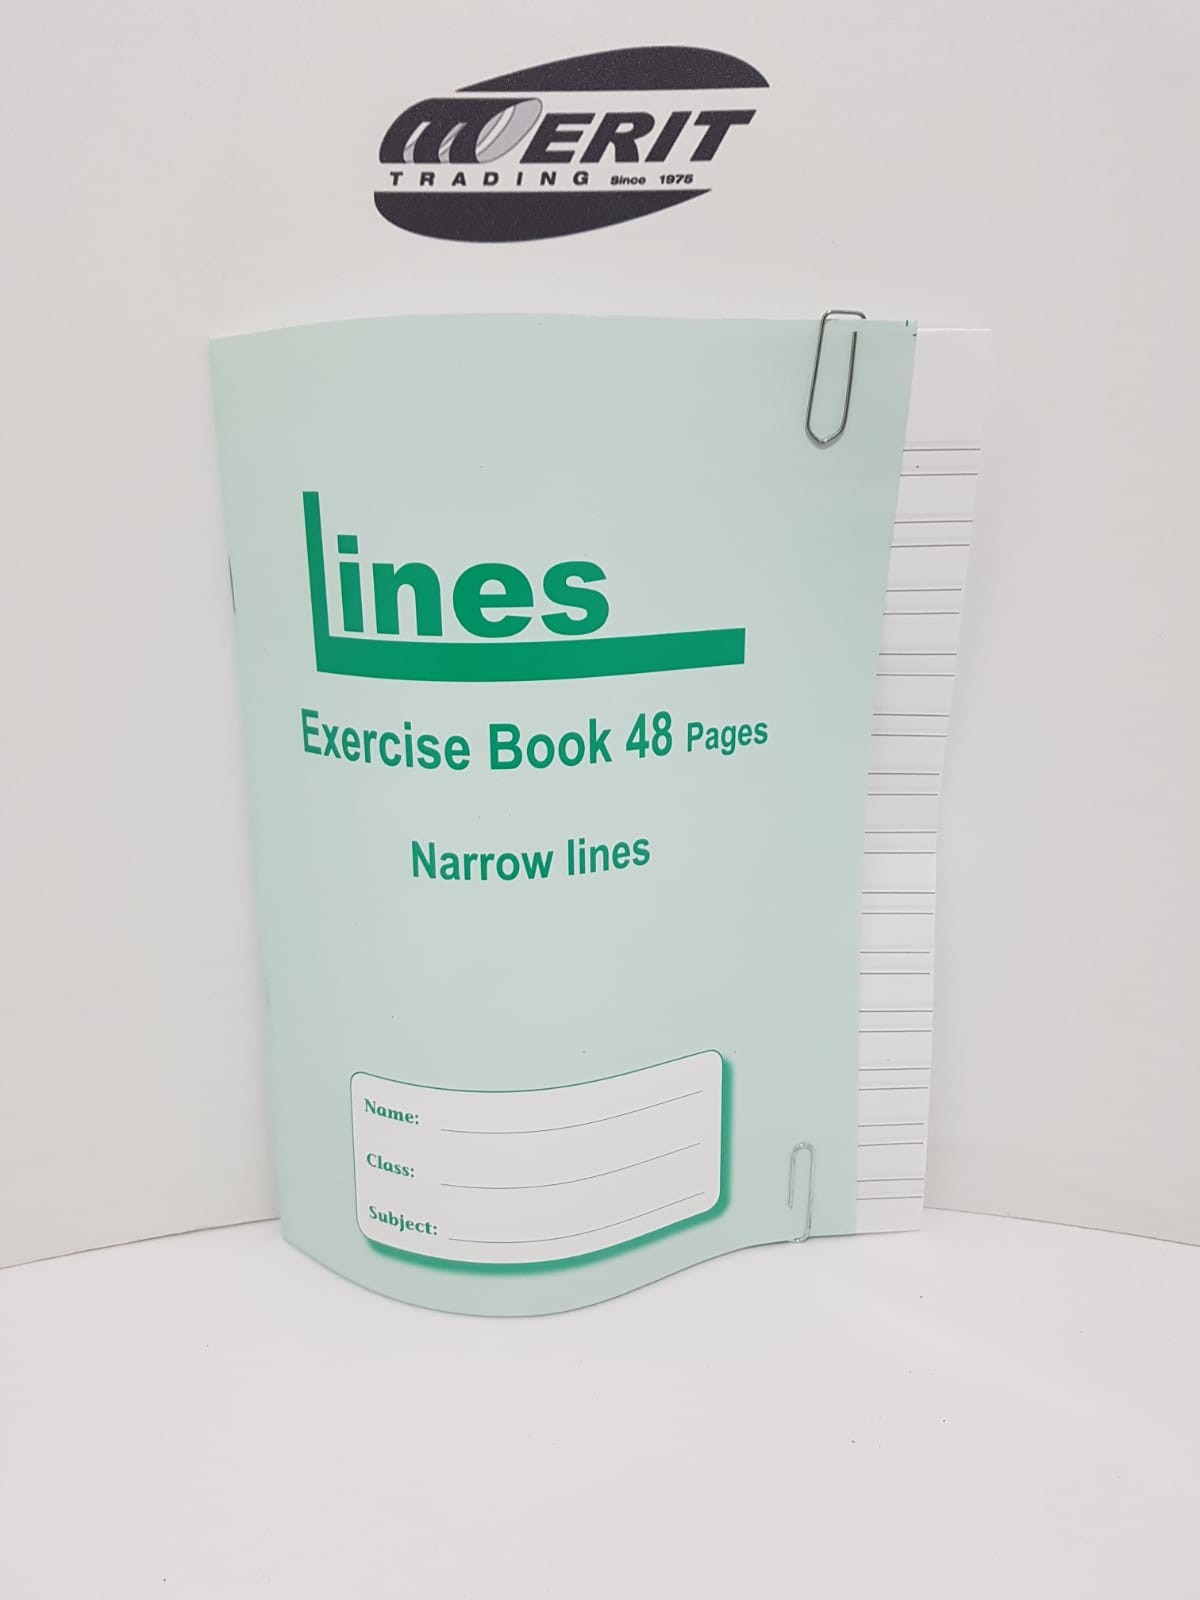 Ex/Book (a2)- Lines Collection 48 Pages Narrow 13 Lines (x 30)